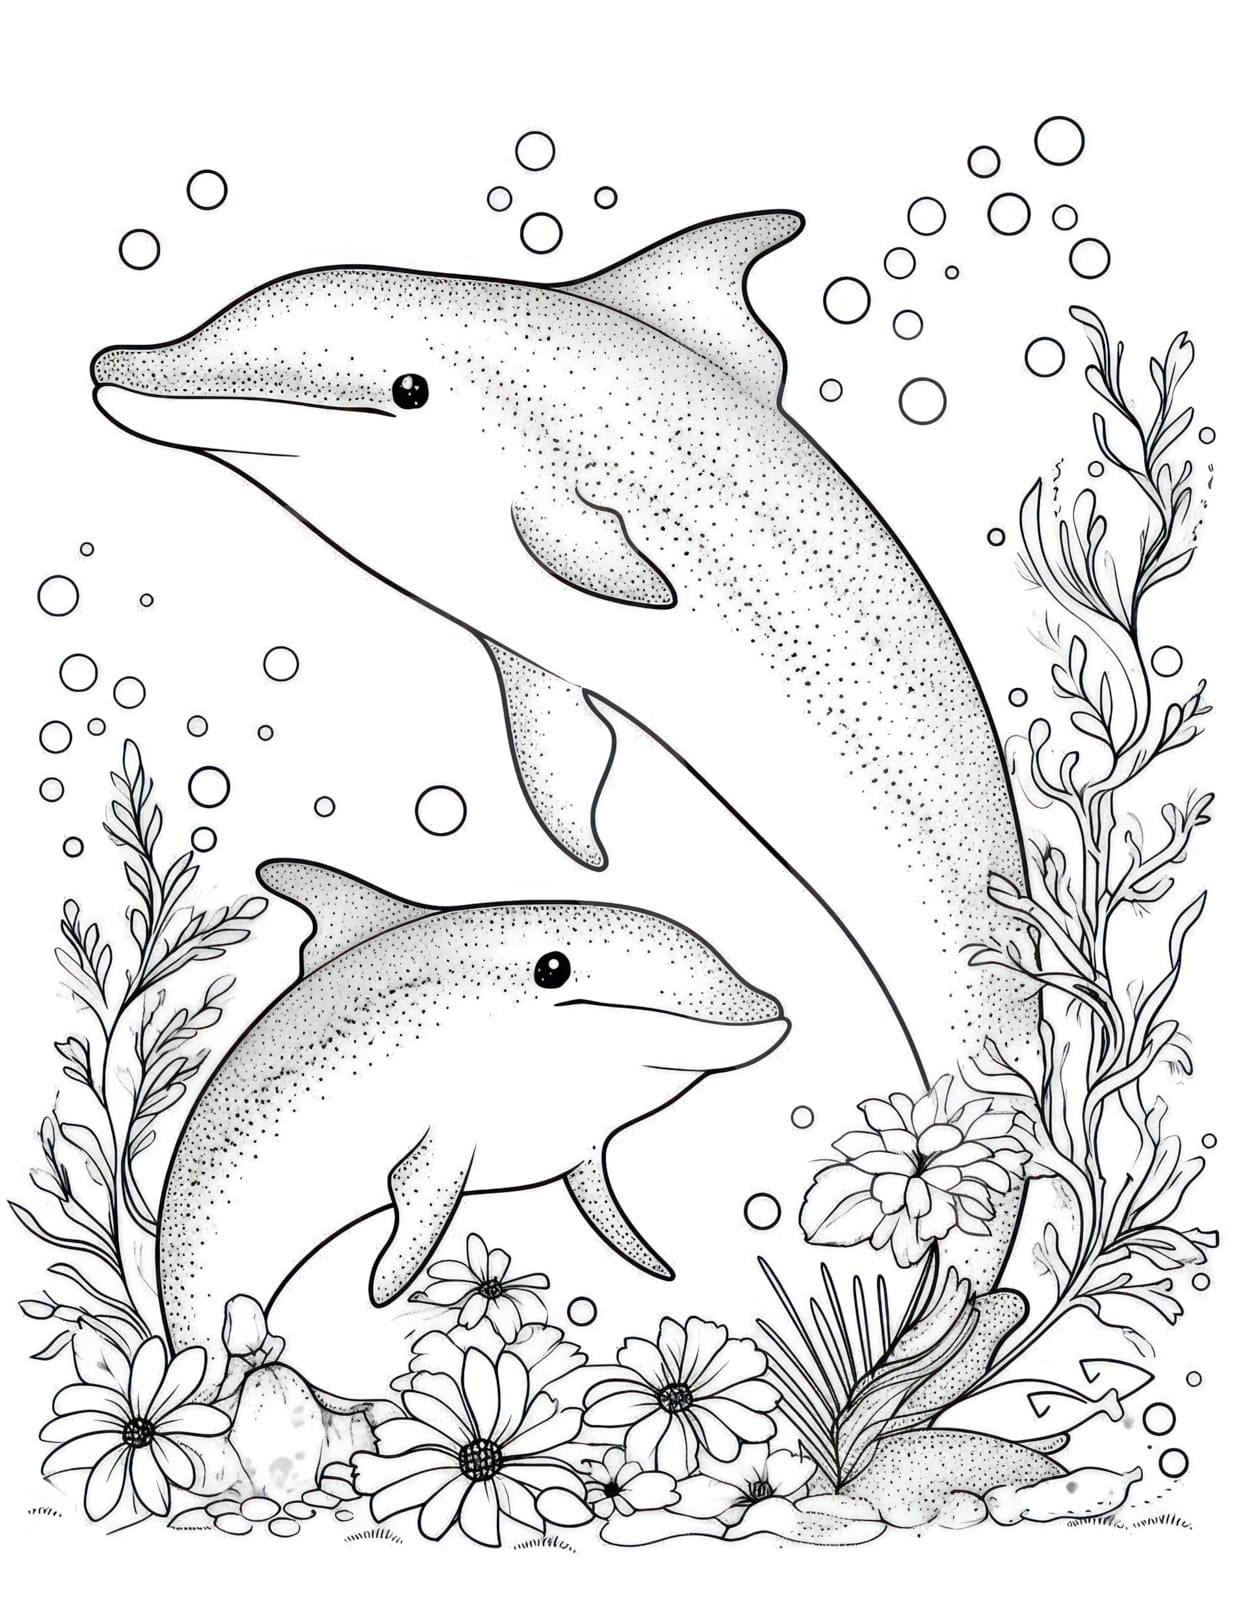 Dolphin coloring pages for kids and adults